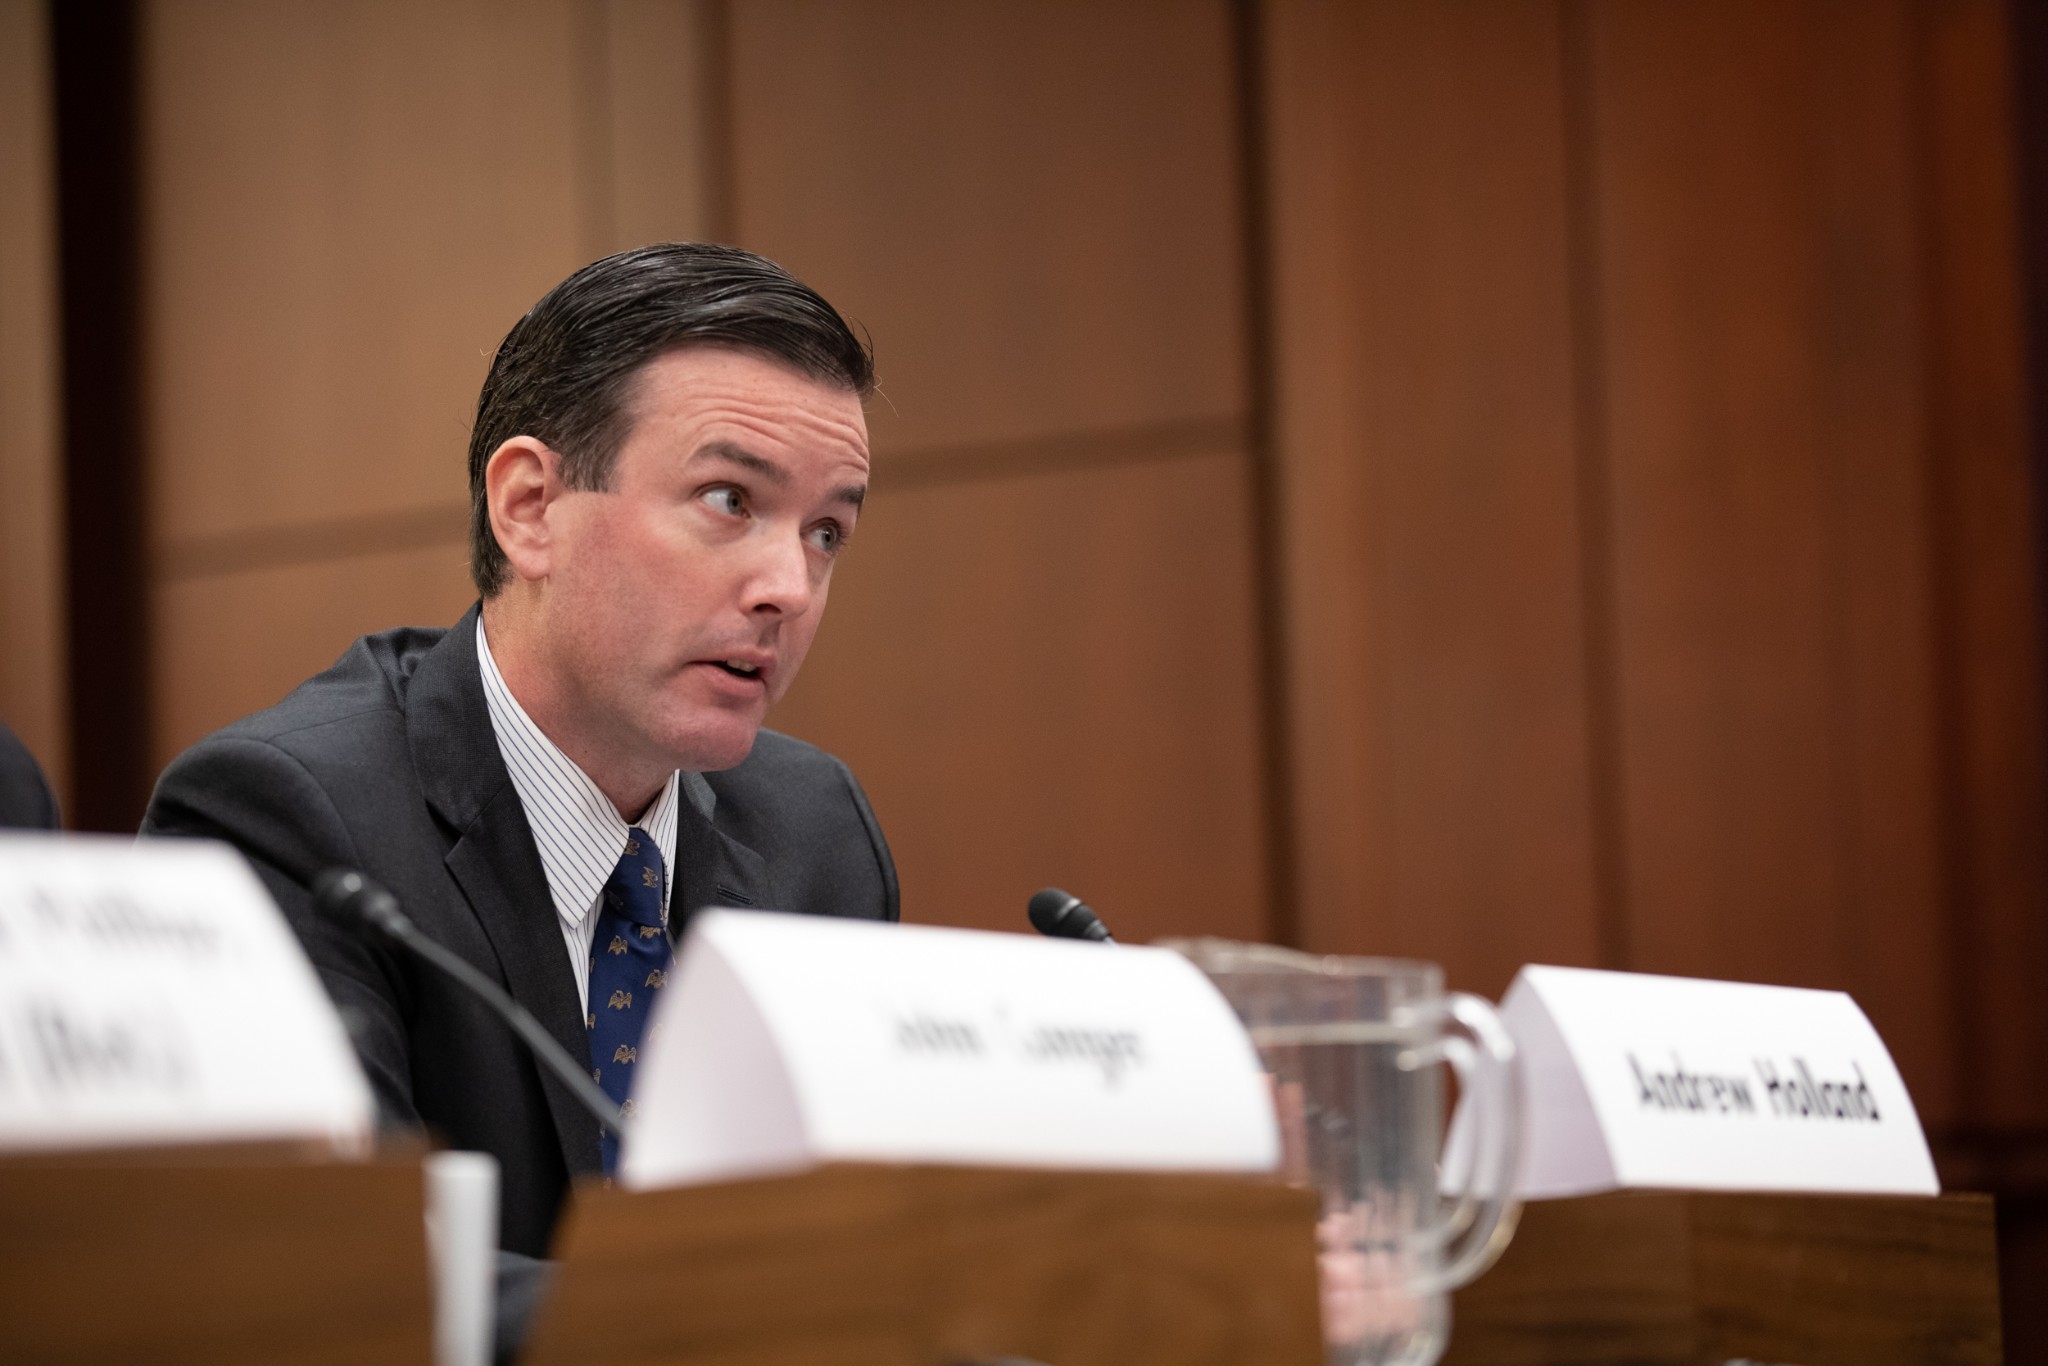 RELEASE: ASP COO Andrew Holland Testifies in Front of Congress